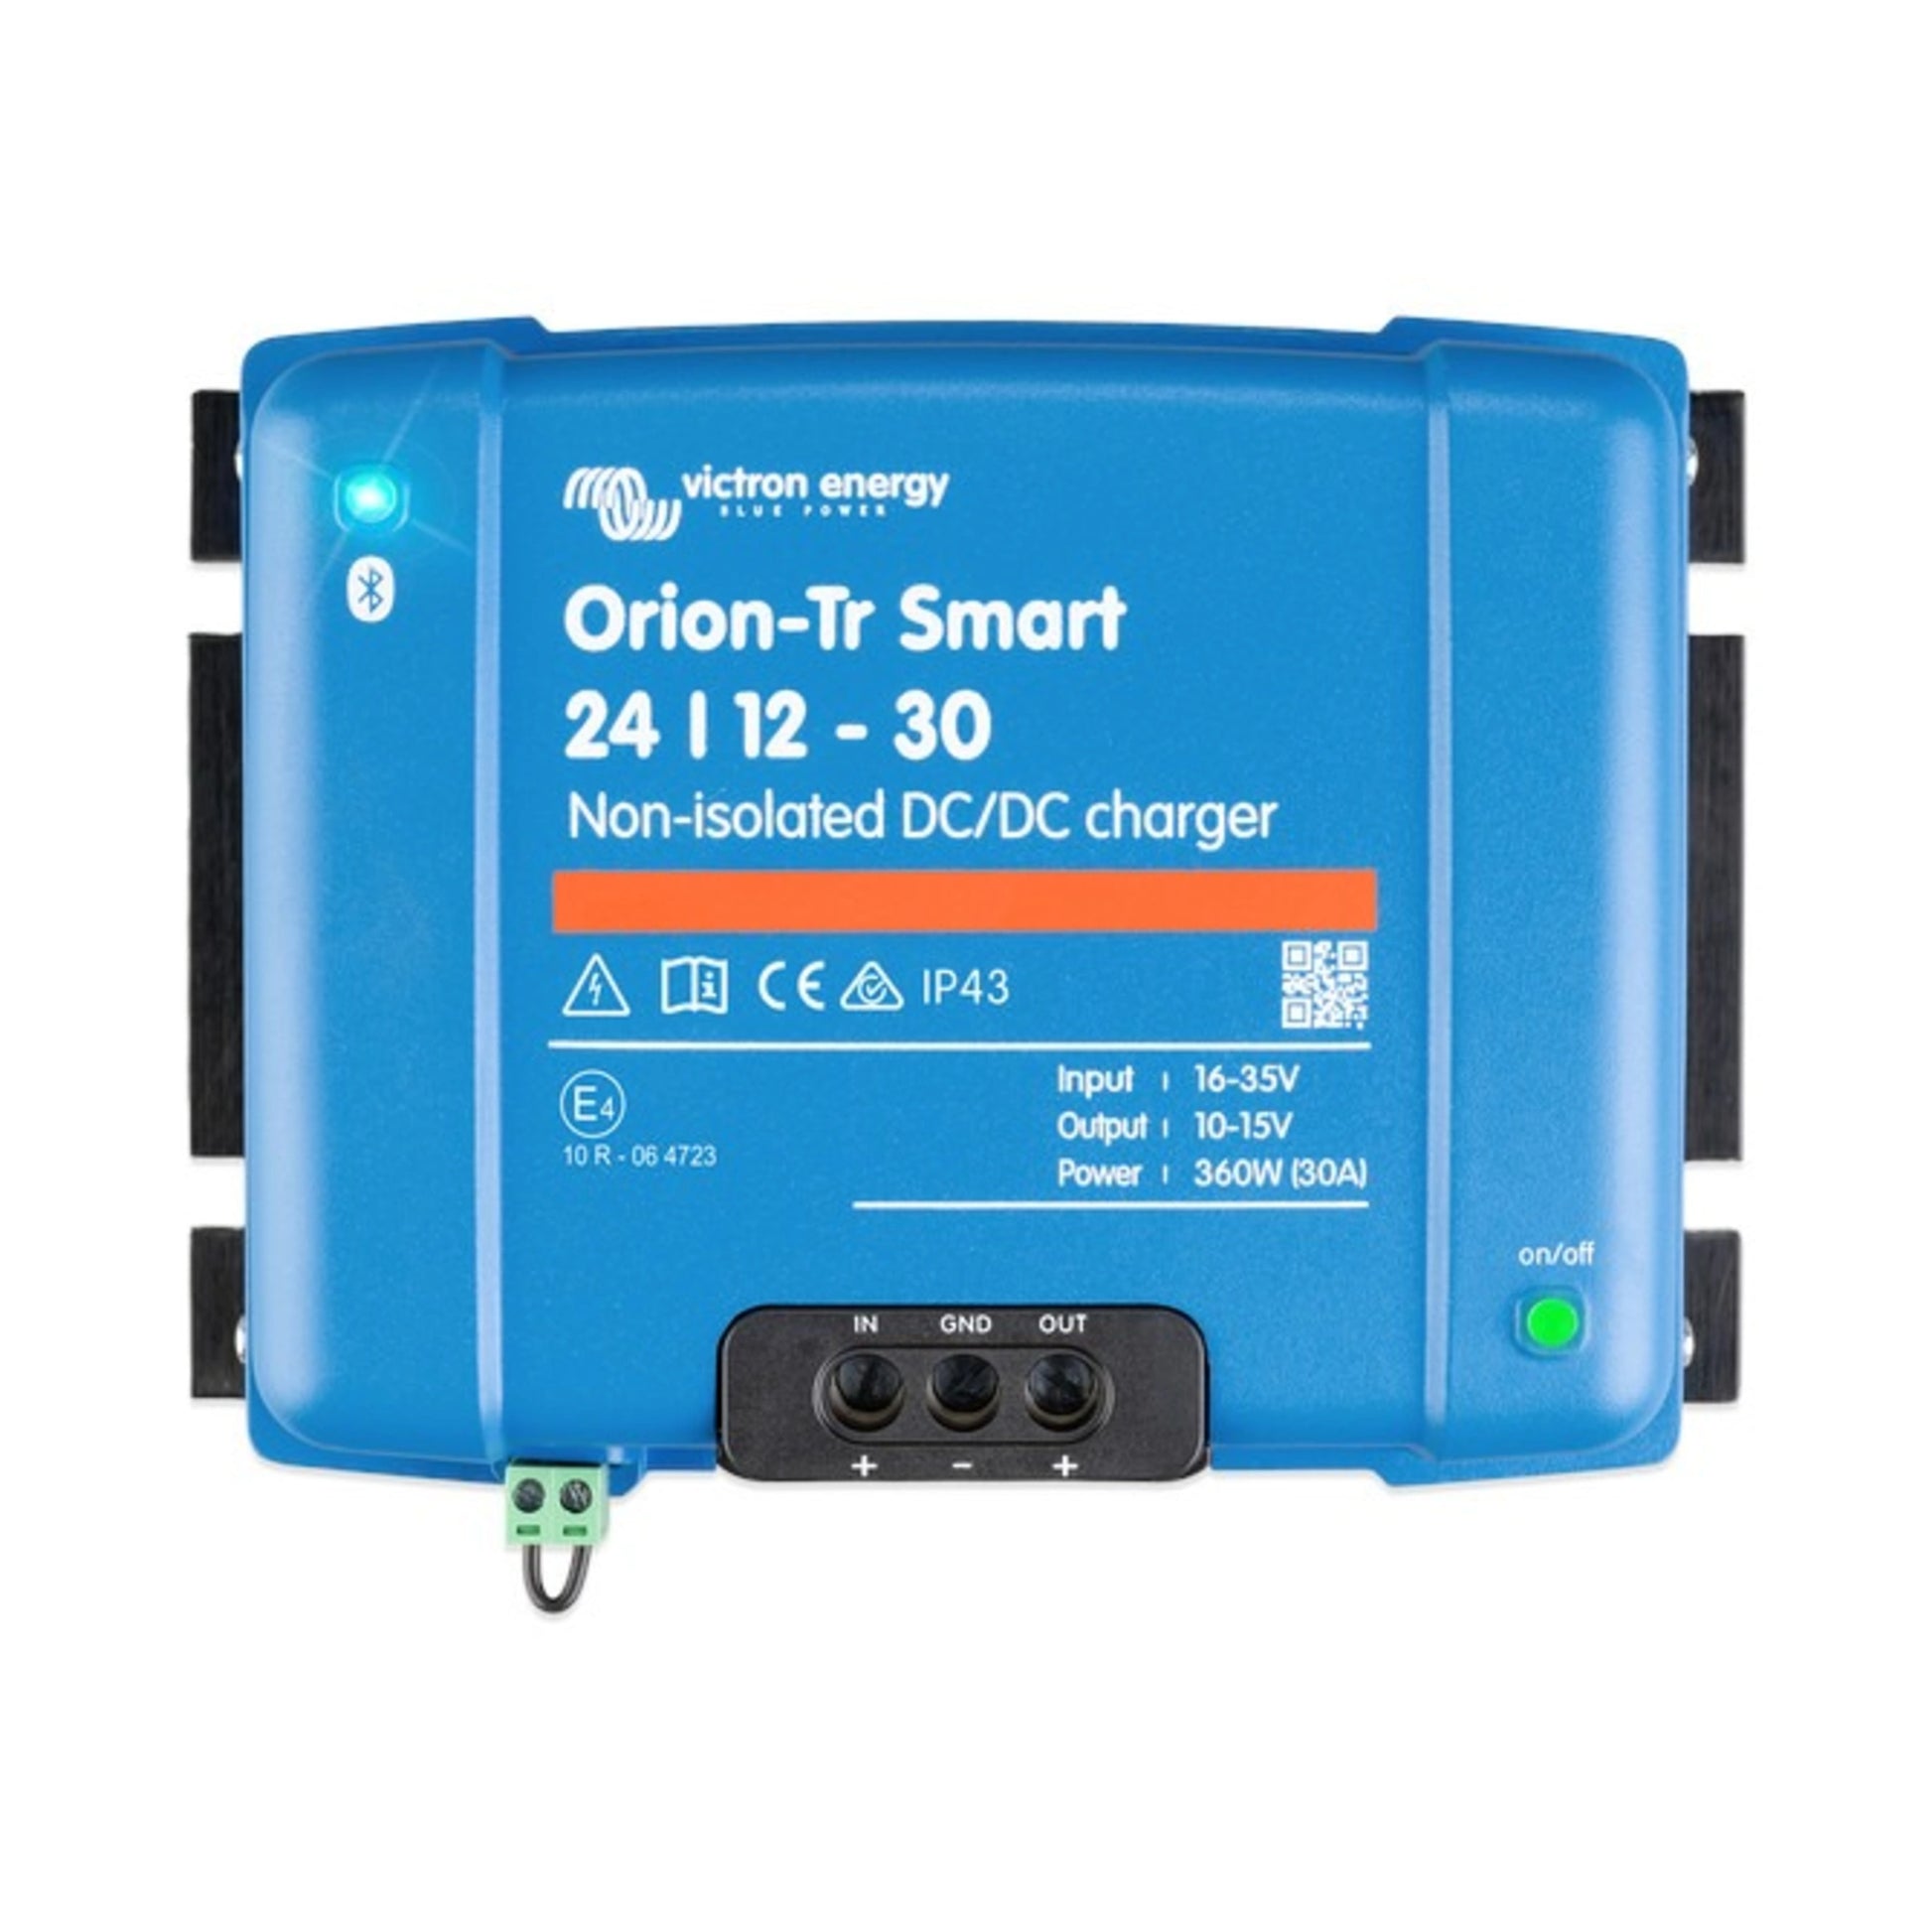 New Product: Orion-Tr Smart DC-DC charger - Victron Energy